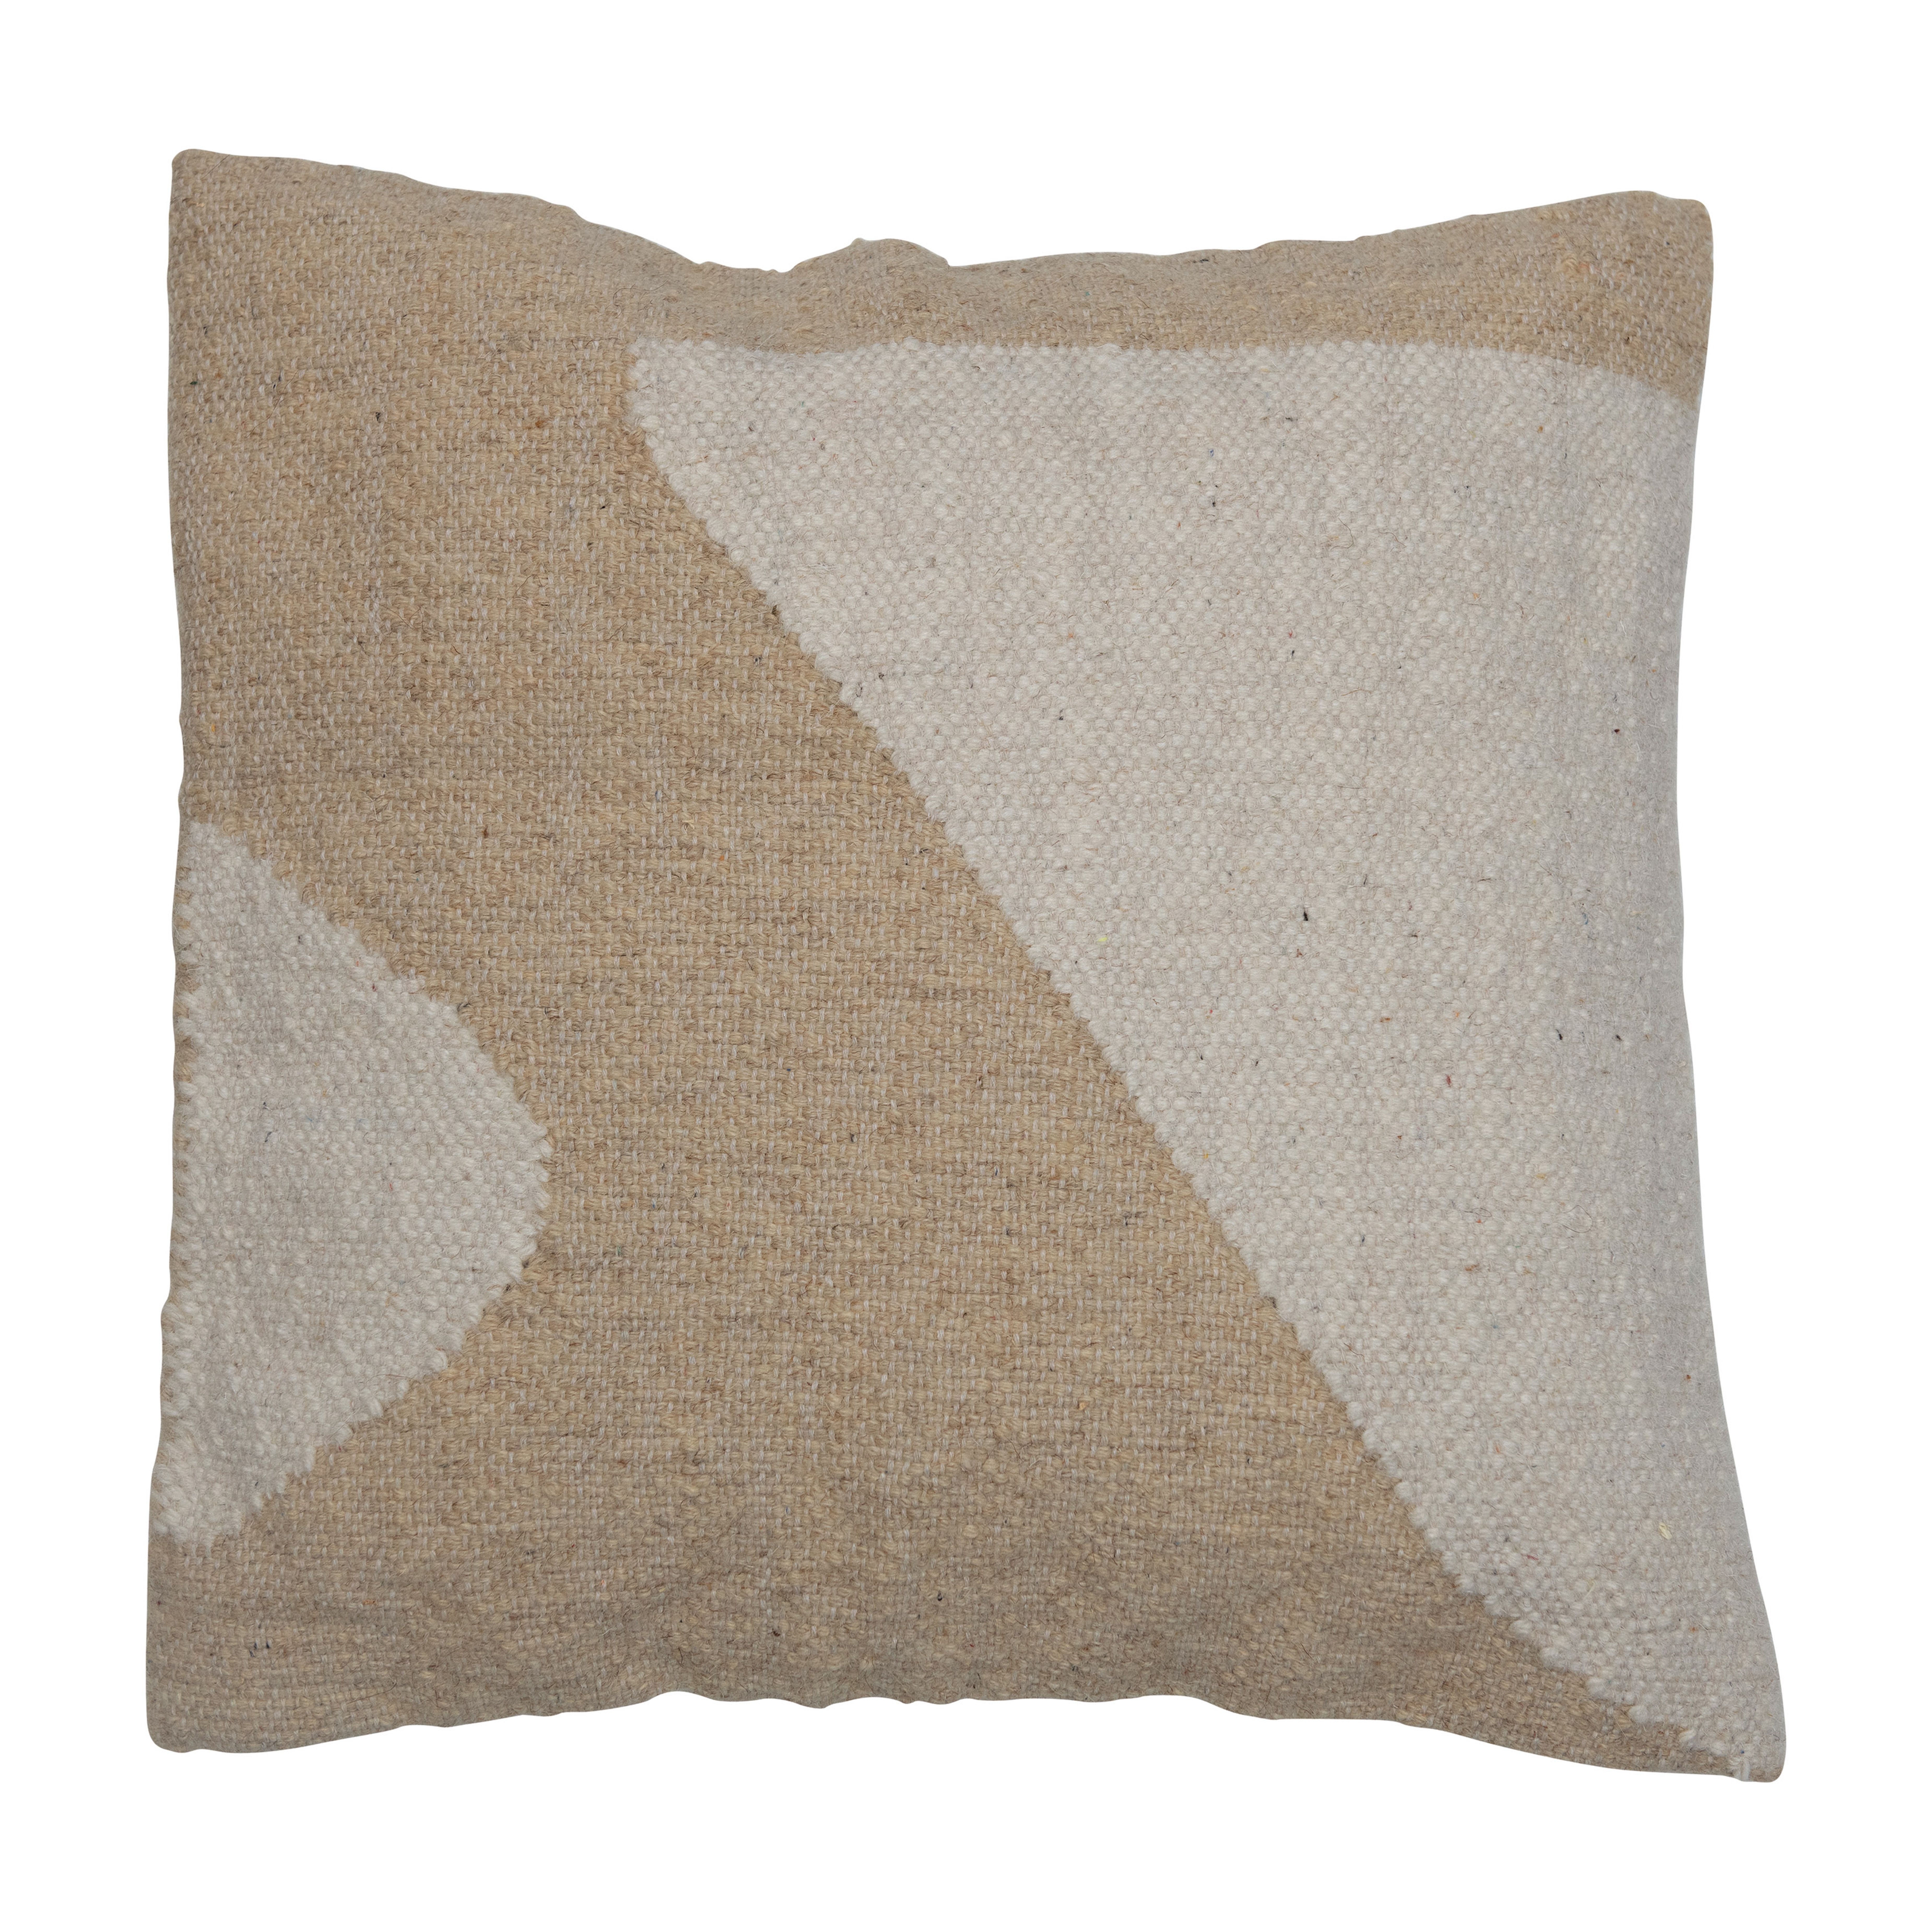 Rustic Modern Decorative Woven Cotton and Wool Square Kilim Pillow - Nomad Home